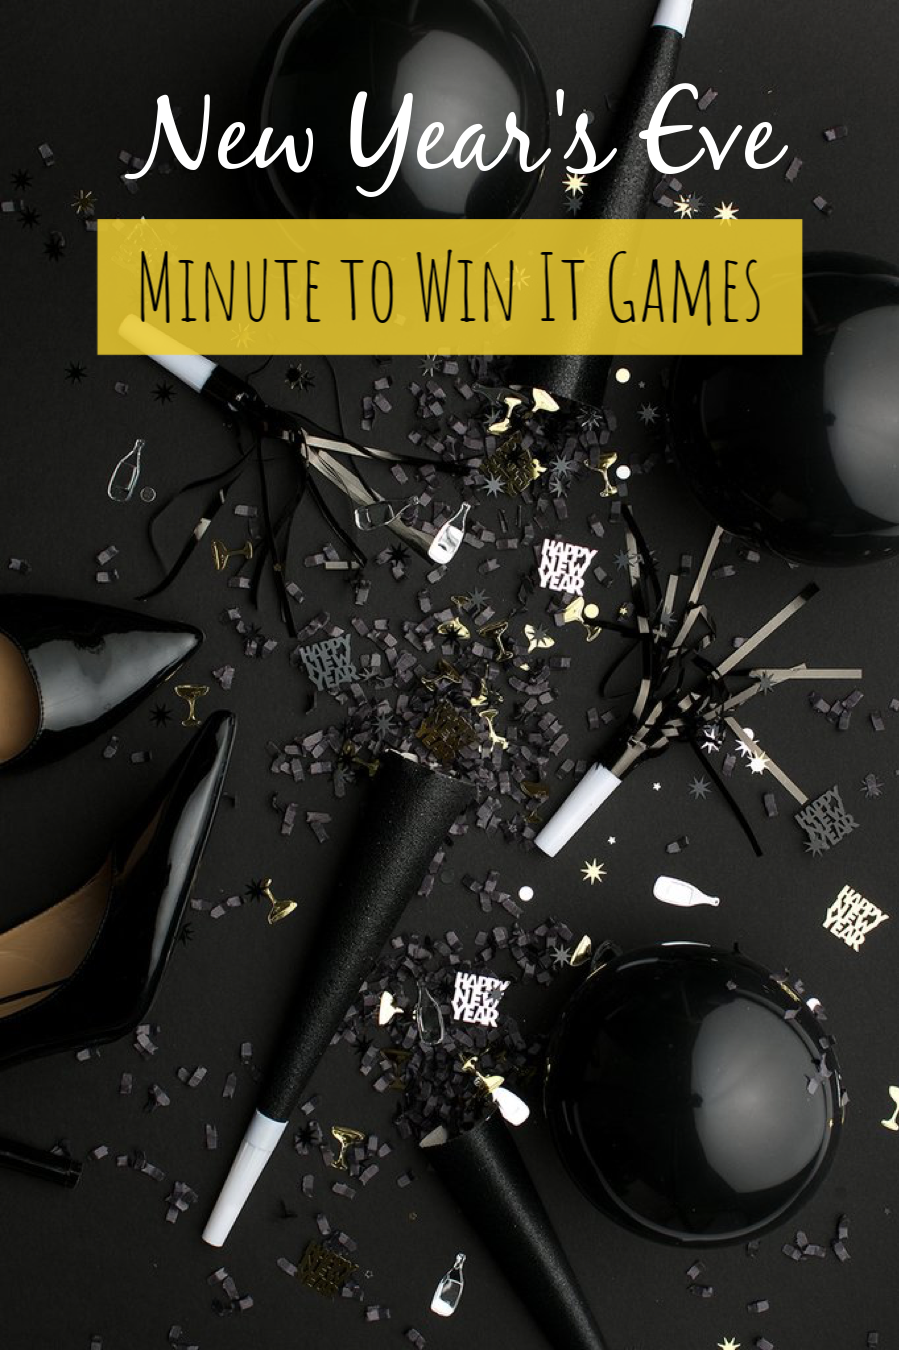 New Year's Eve Minute to Win It Games to play with the whole family.